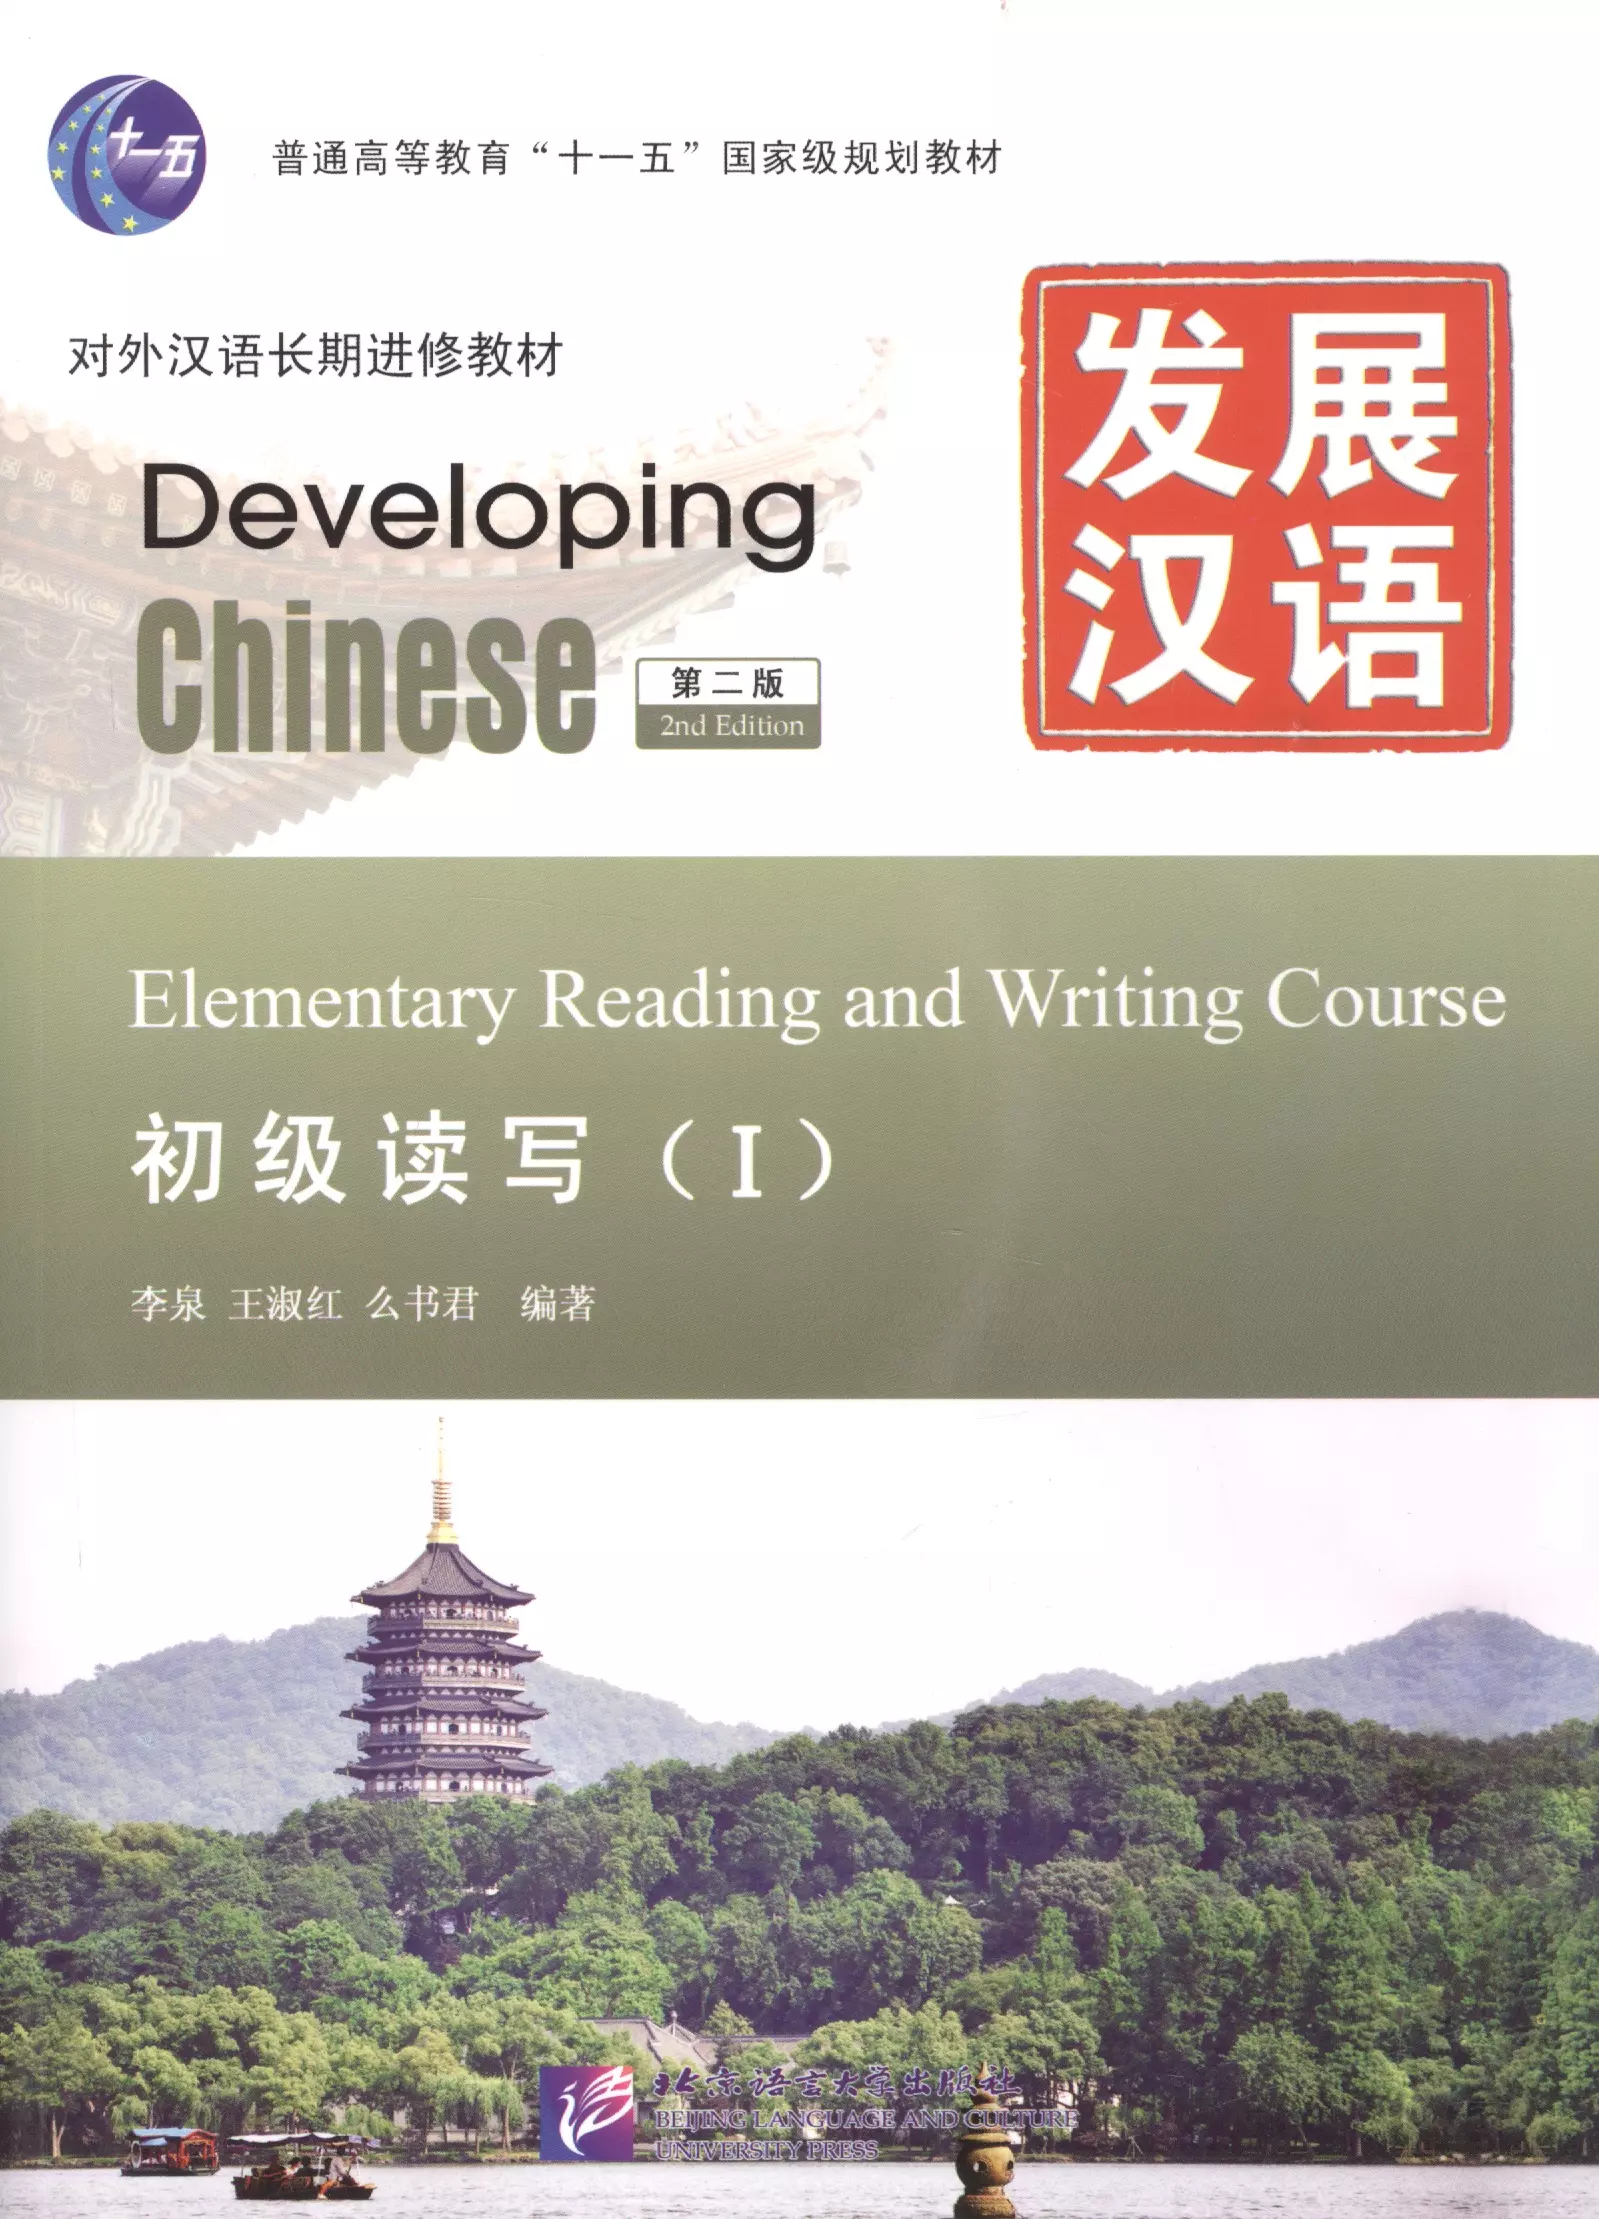  - Developing Chinese Elementary 1 (2nd Edition) Reading and Writing Course (на кит. яз. и англ. яз.) (